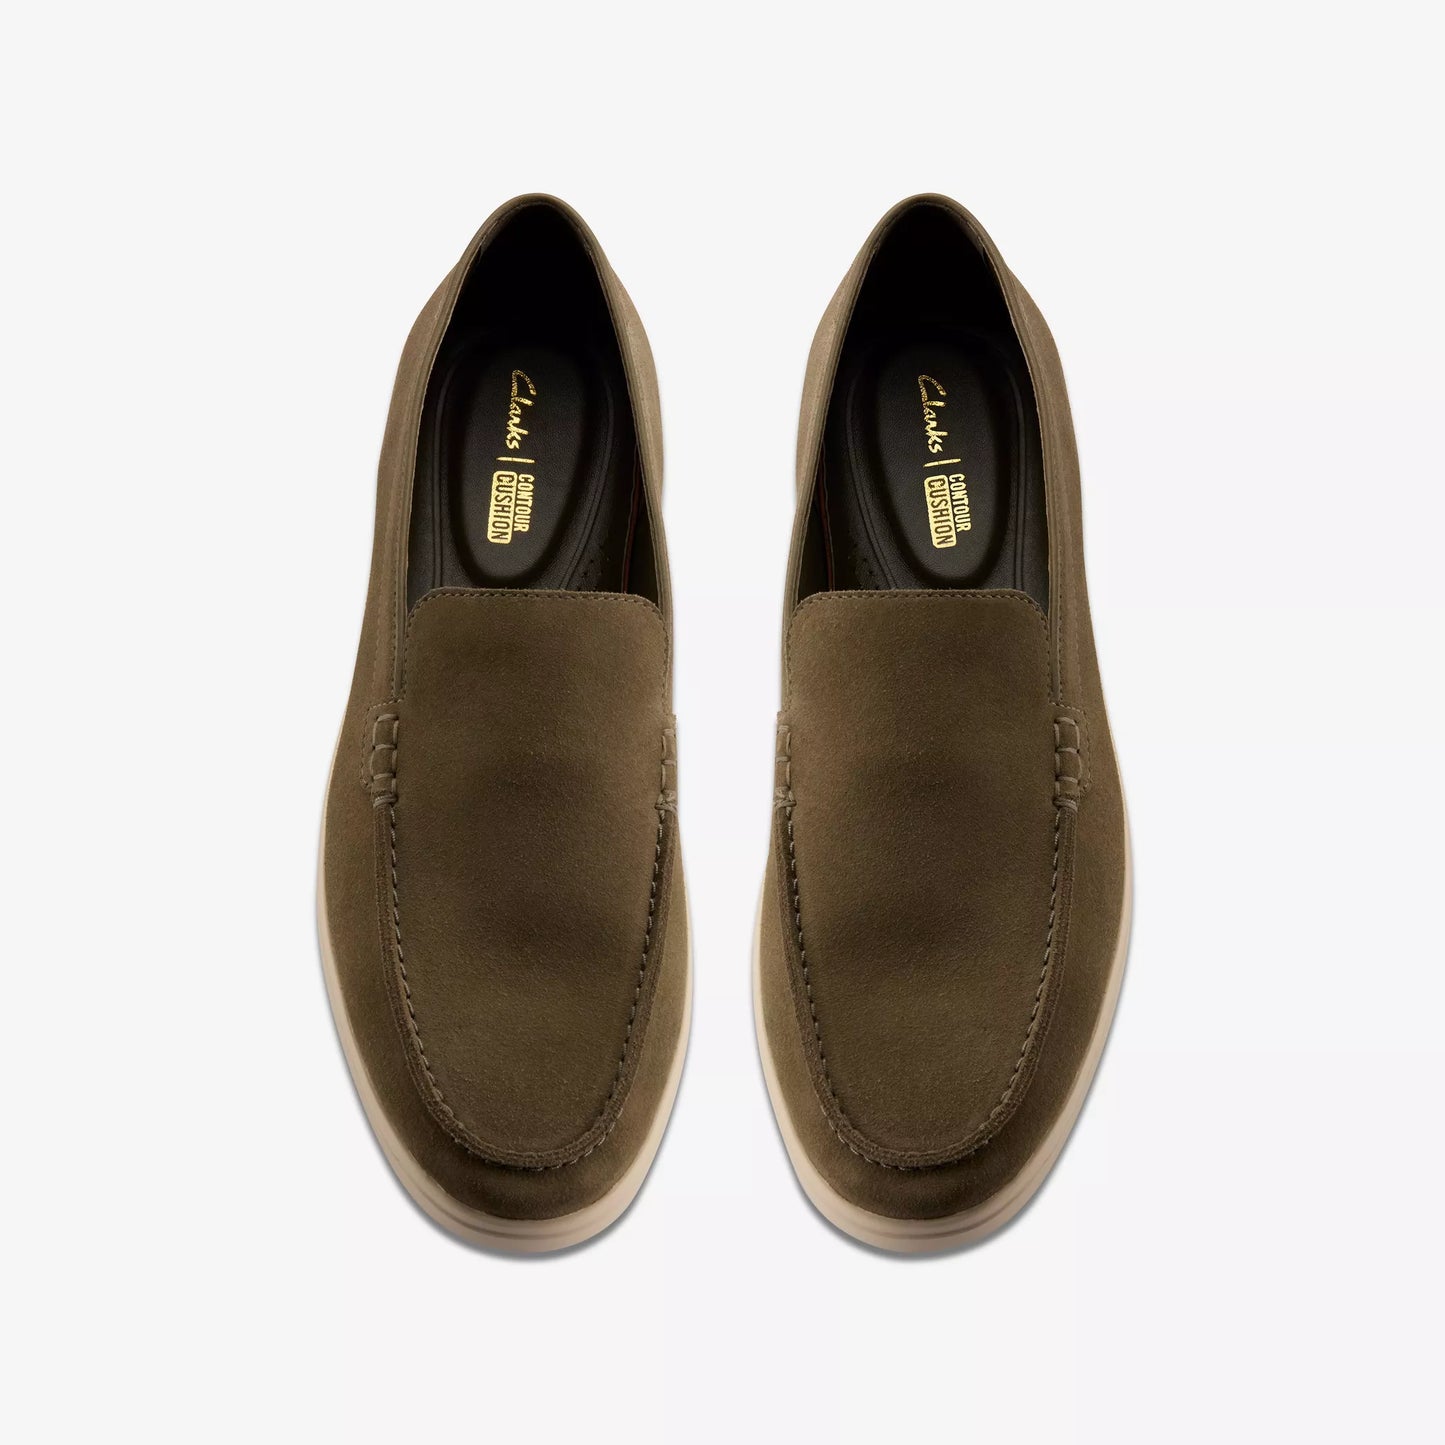 CLARKS | SCARPE CASUAL PER UOMINI | TORFORD EASY OLIVE SUEDE | VERDE